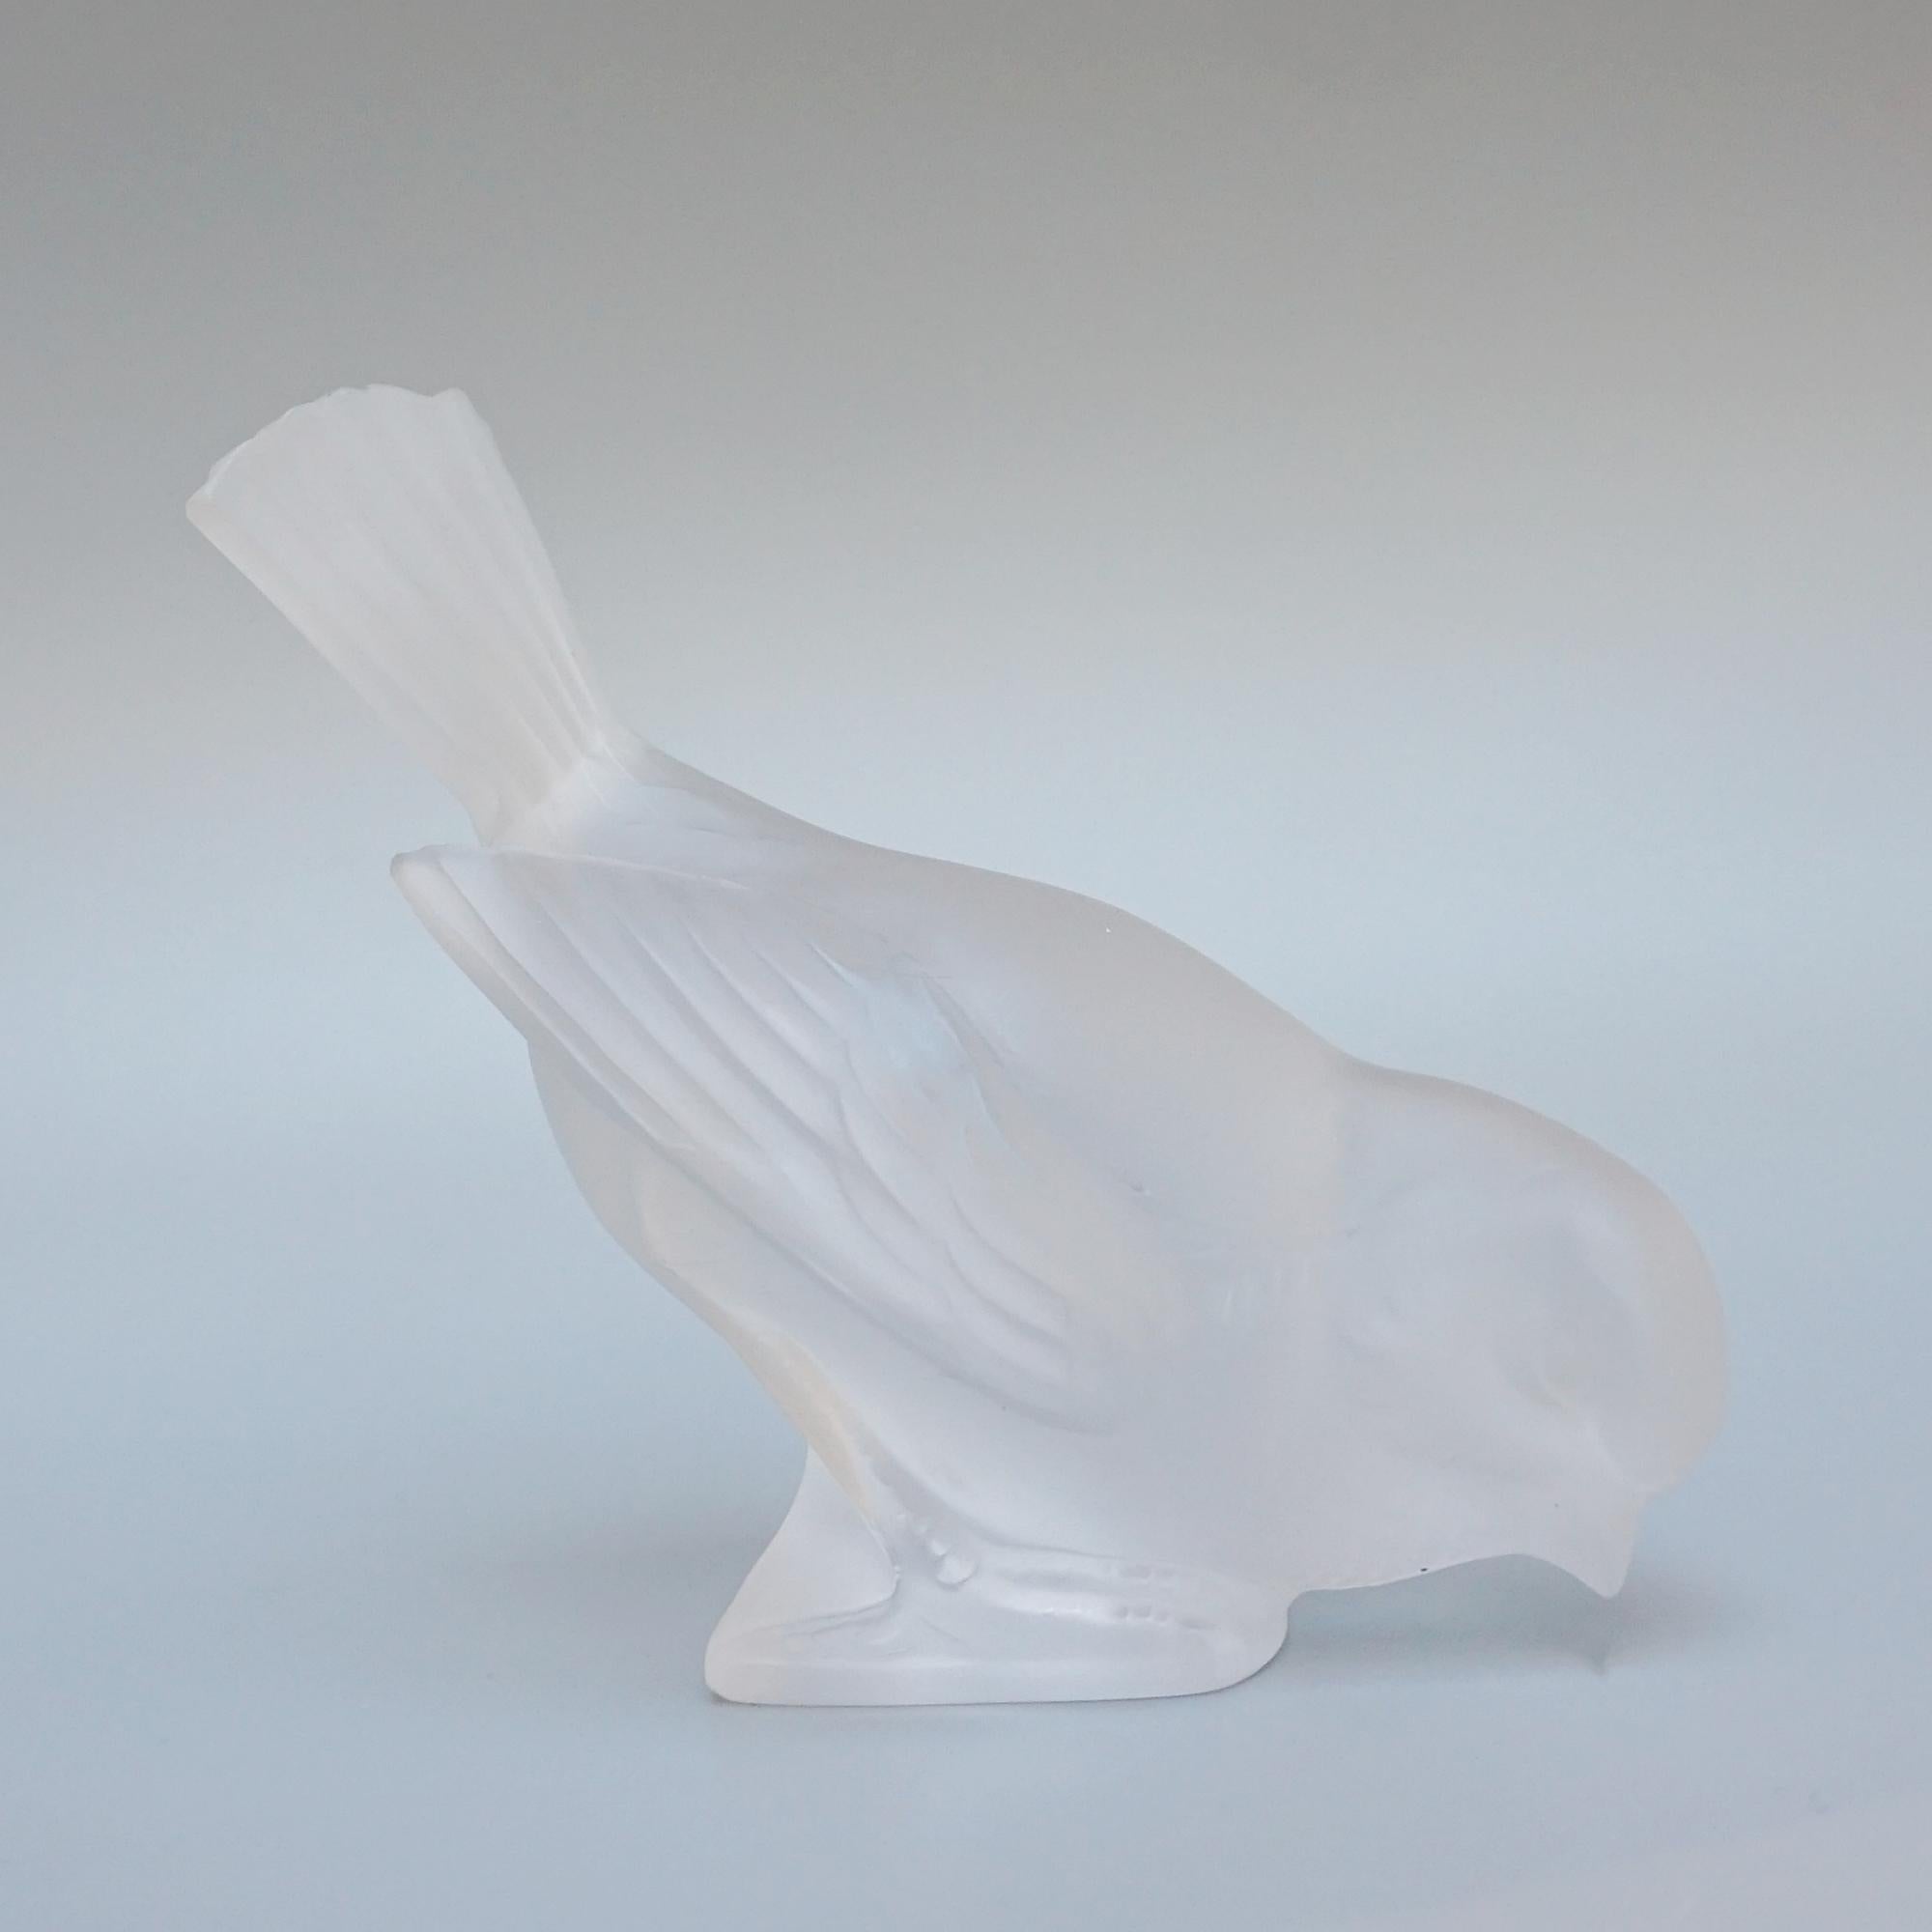 Mid-20th Century 'Moineau Timide' A Glass Paperweight by Marc Lalique (1900 - 1977) For Sale